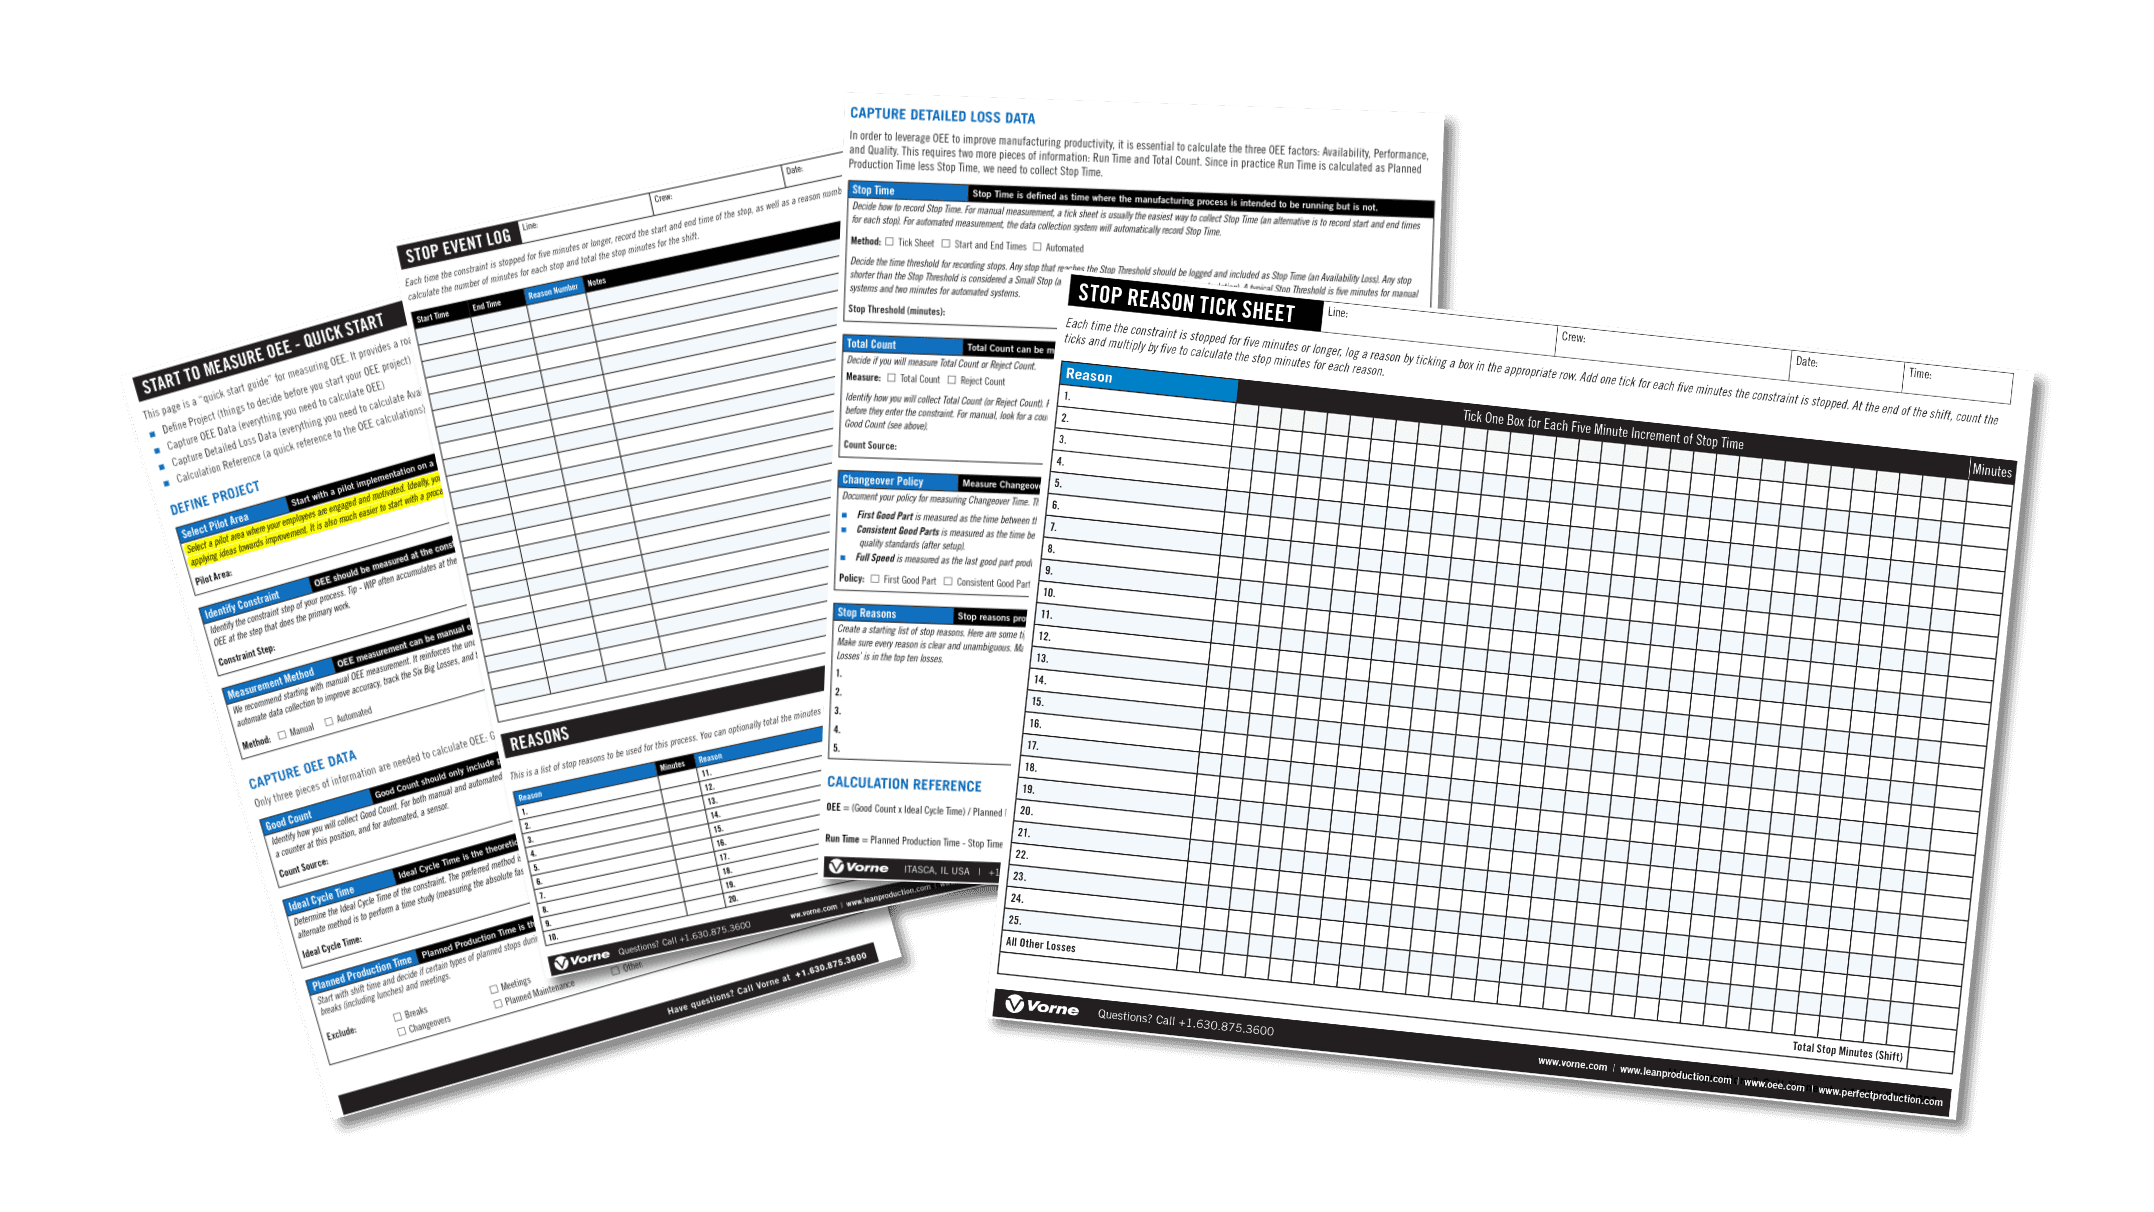 Step by step guide to measuring OEE with downloadable forms